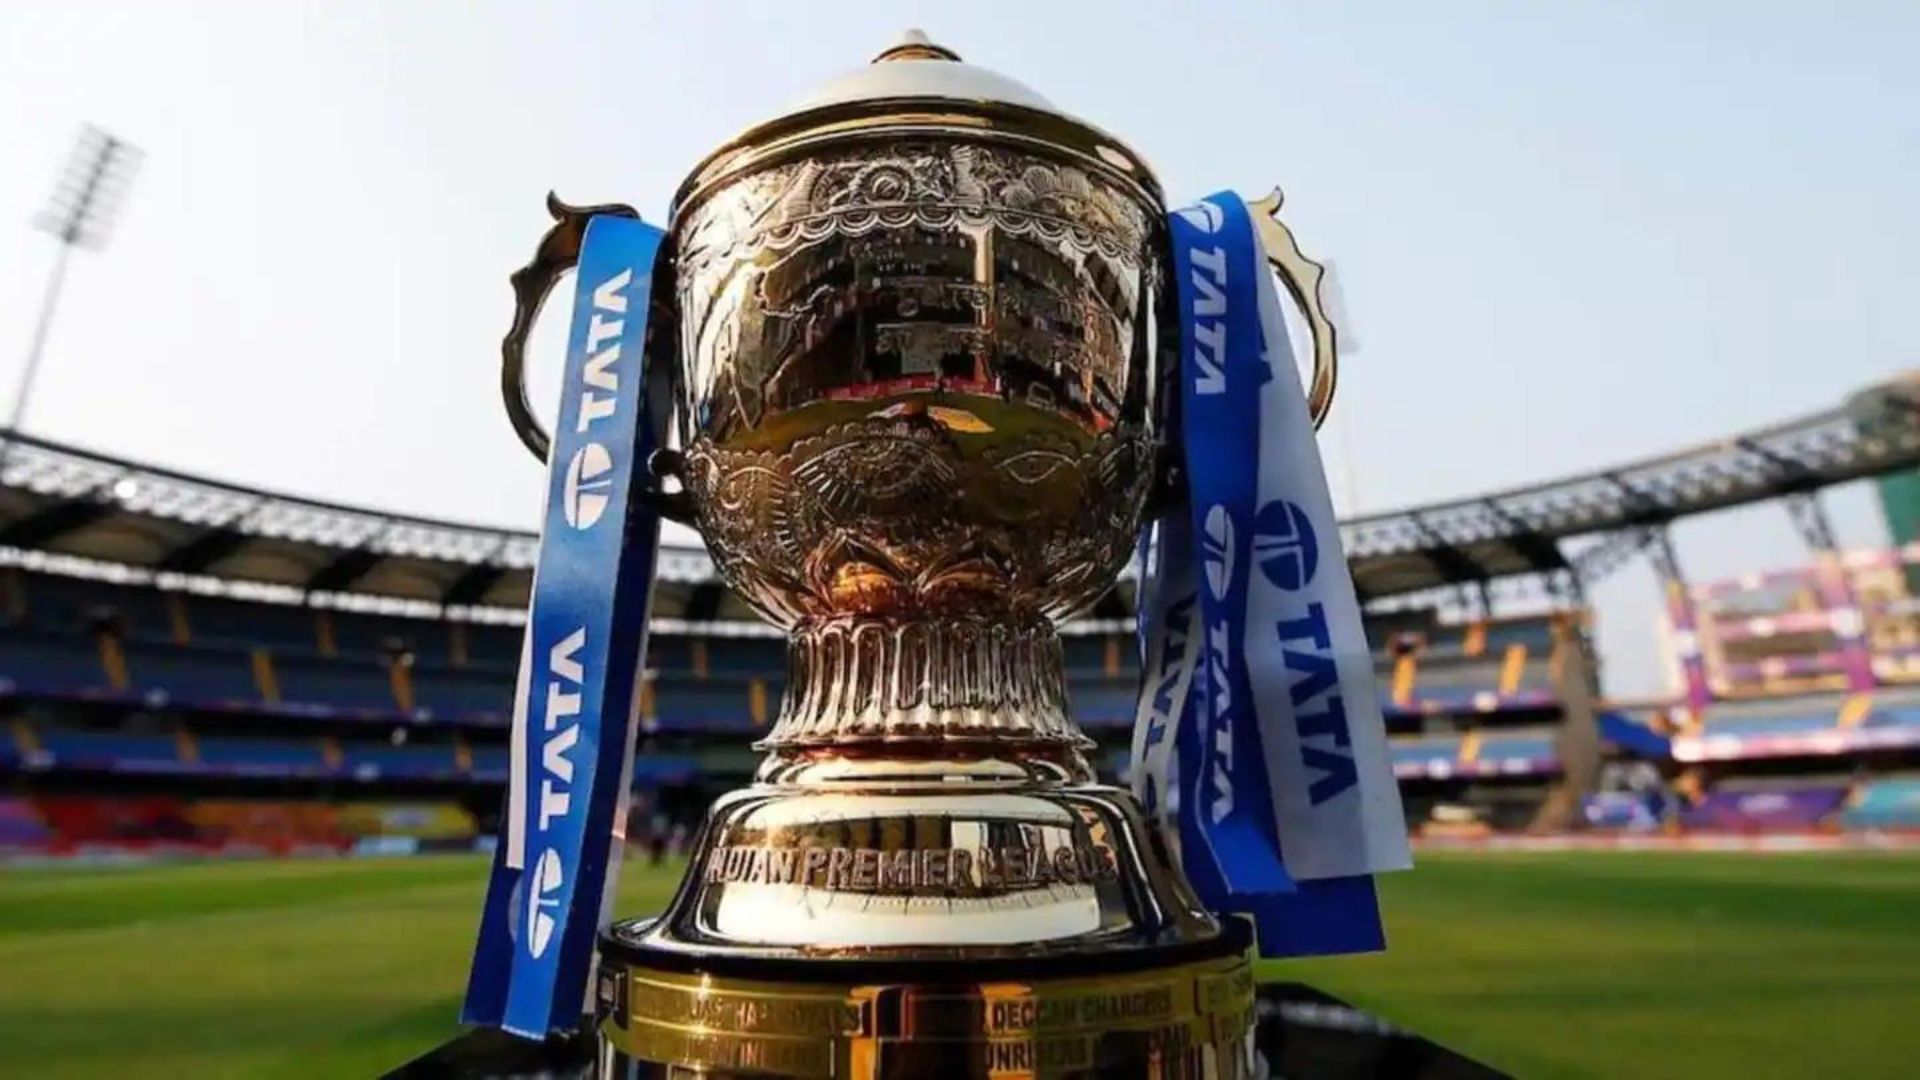 Aakash Chopra feels T20 leagues like IPL will be the priority of respective boards. (P.C.:iplt20.com)